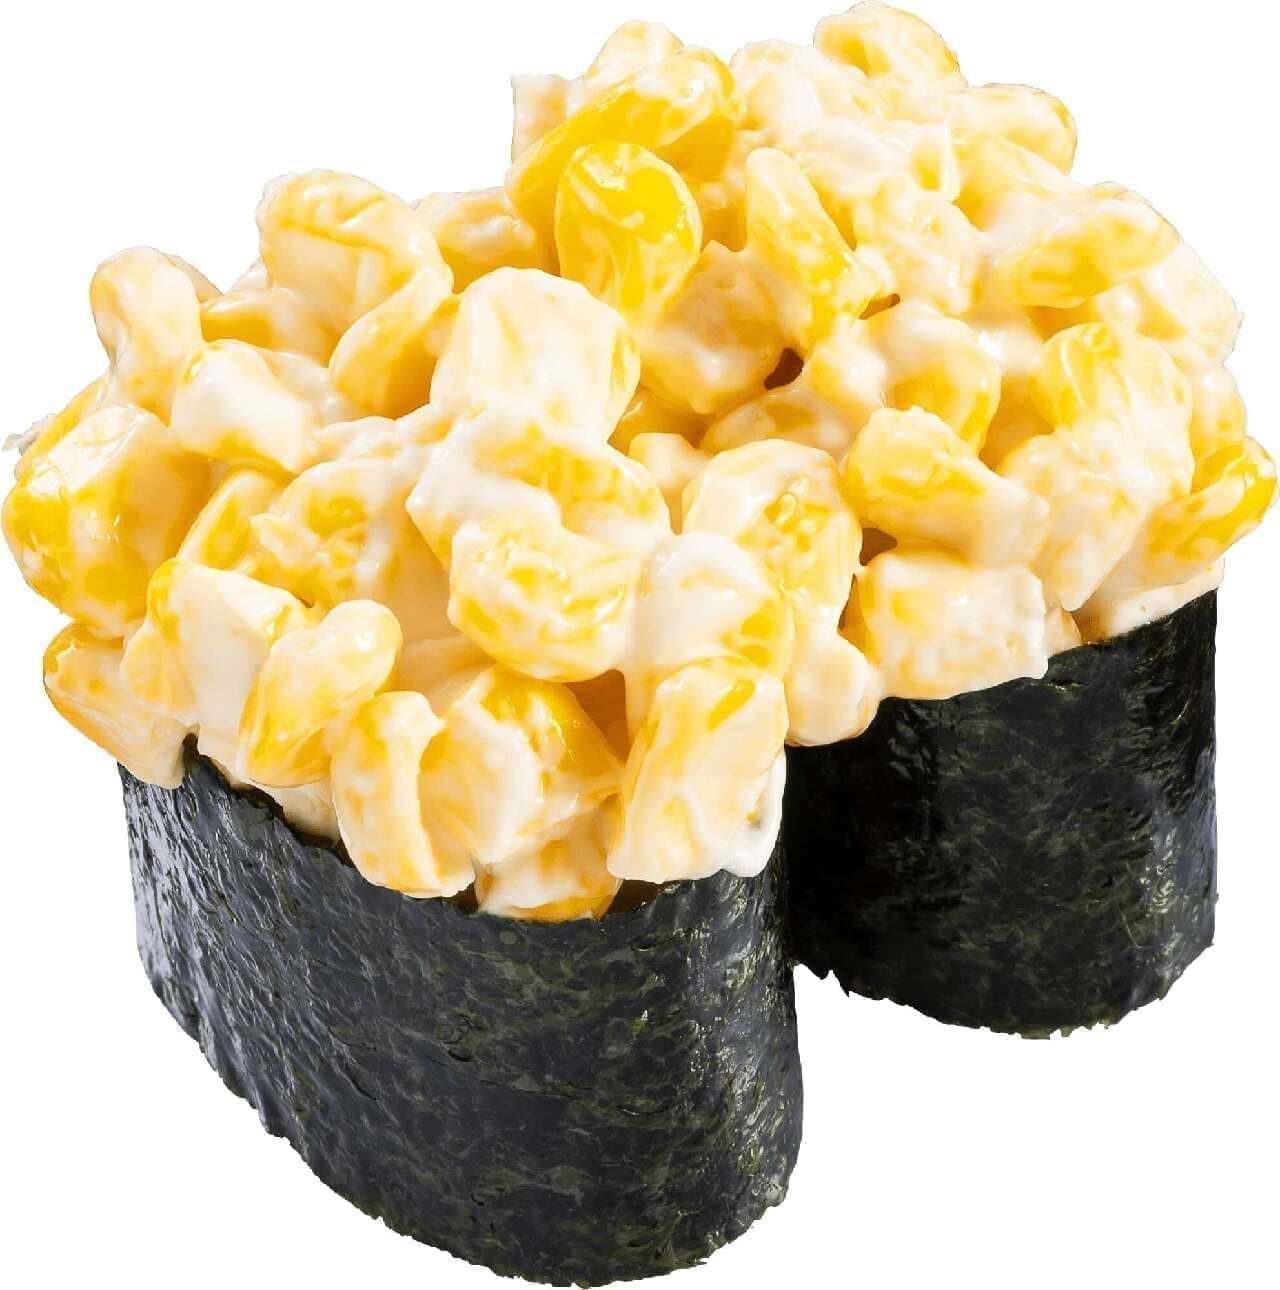 Kappa Sushi "In-store preparation, summer special, touching corn".